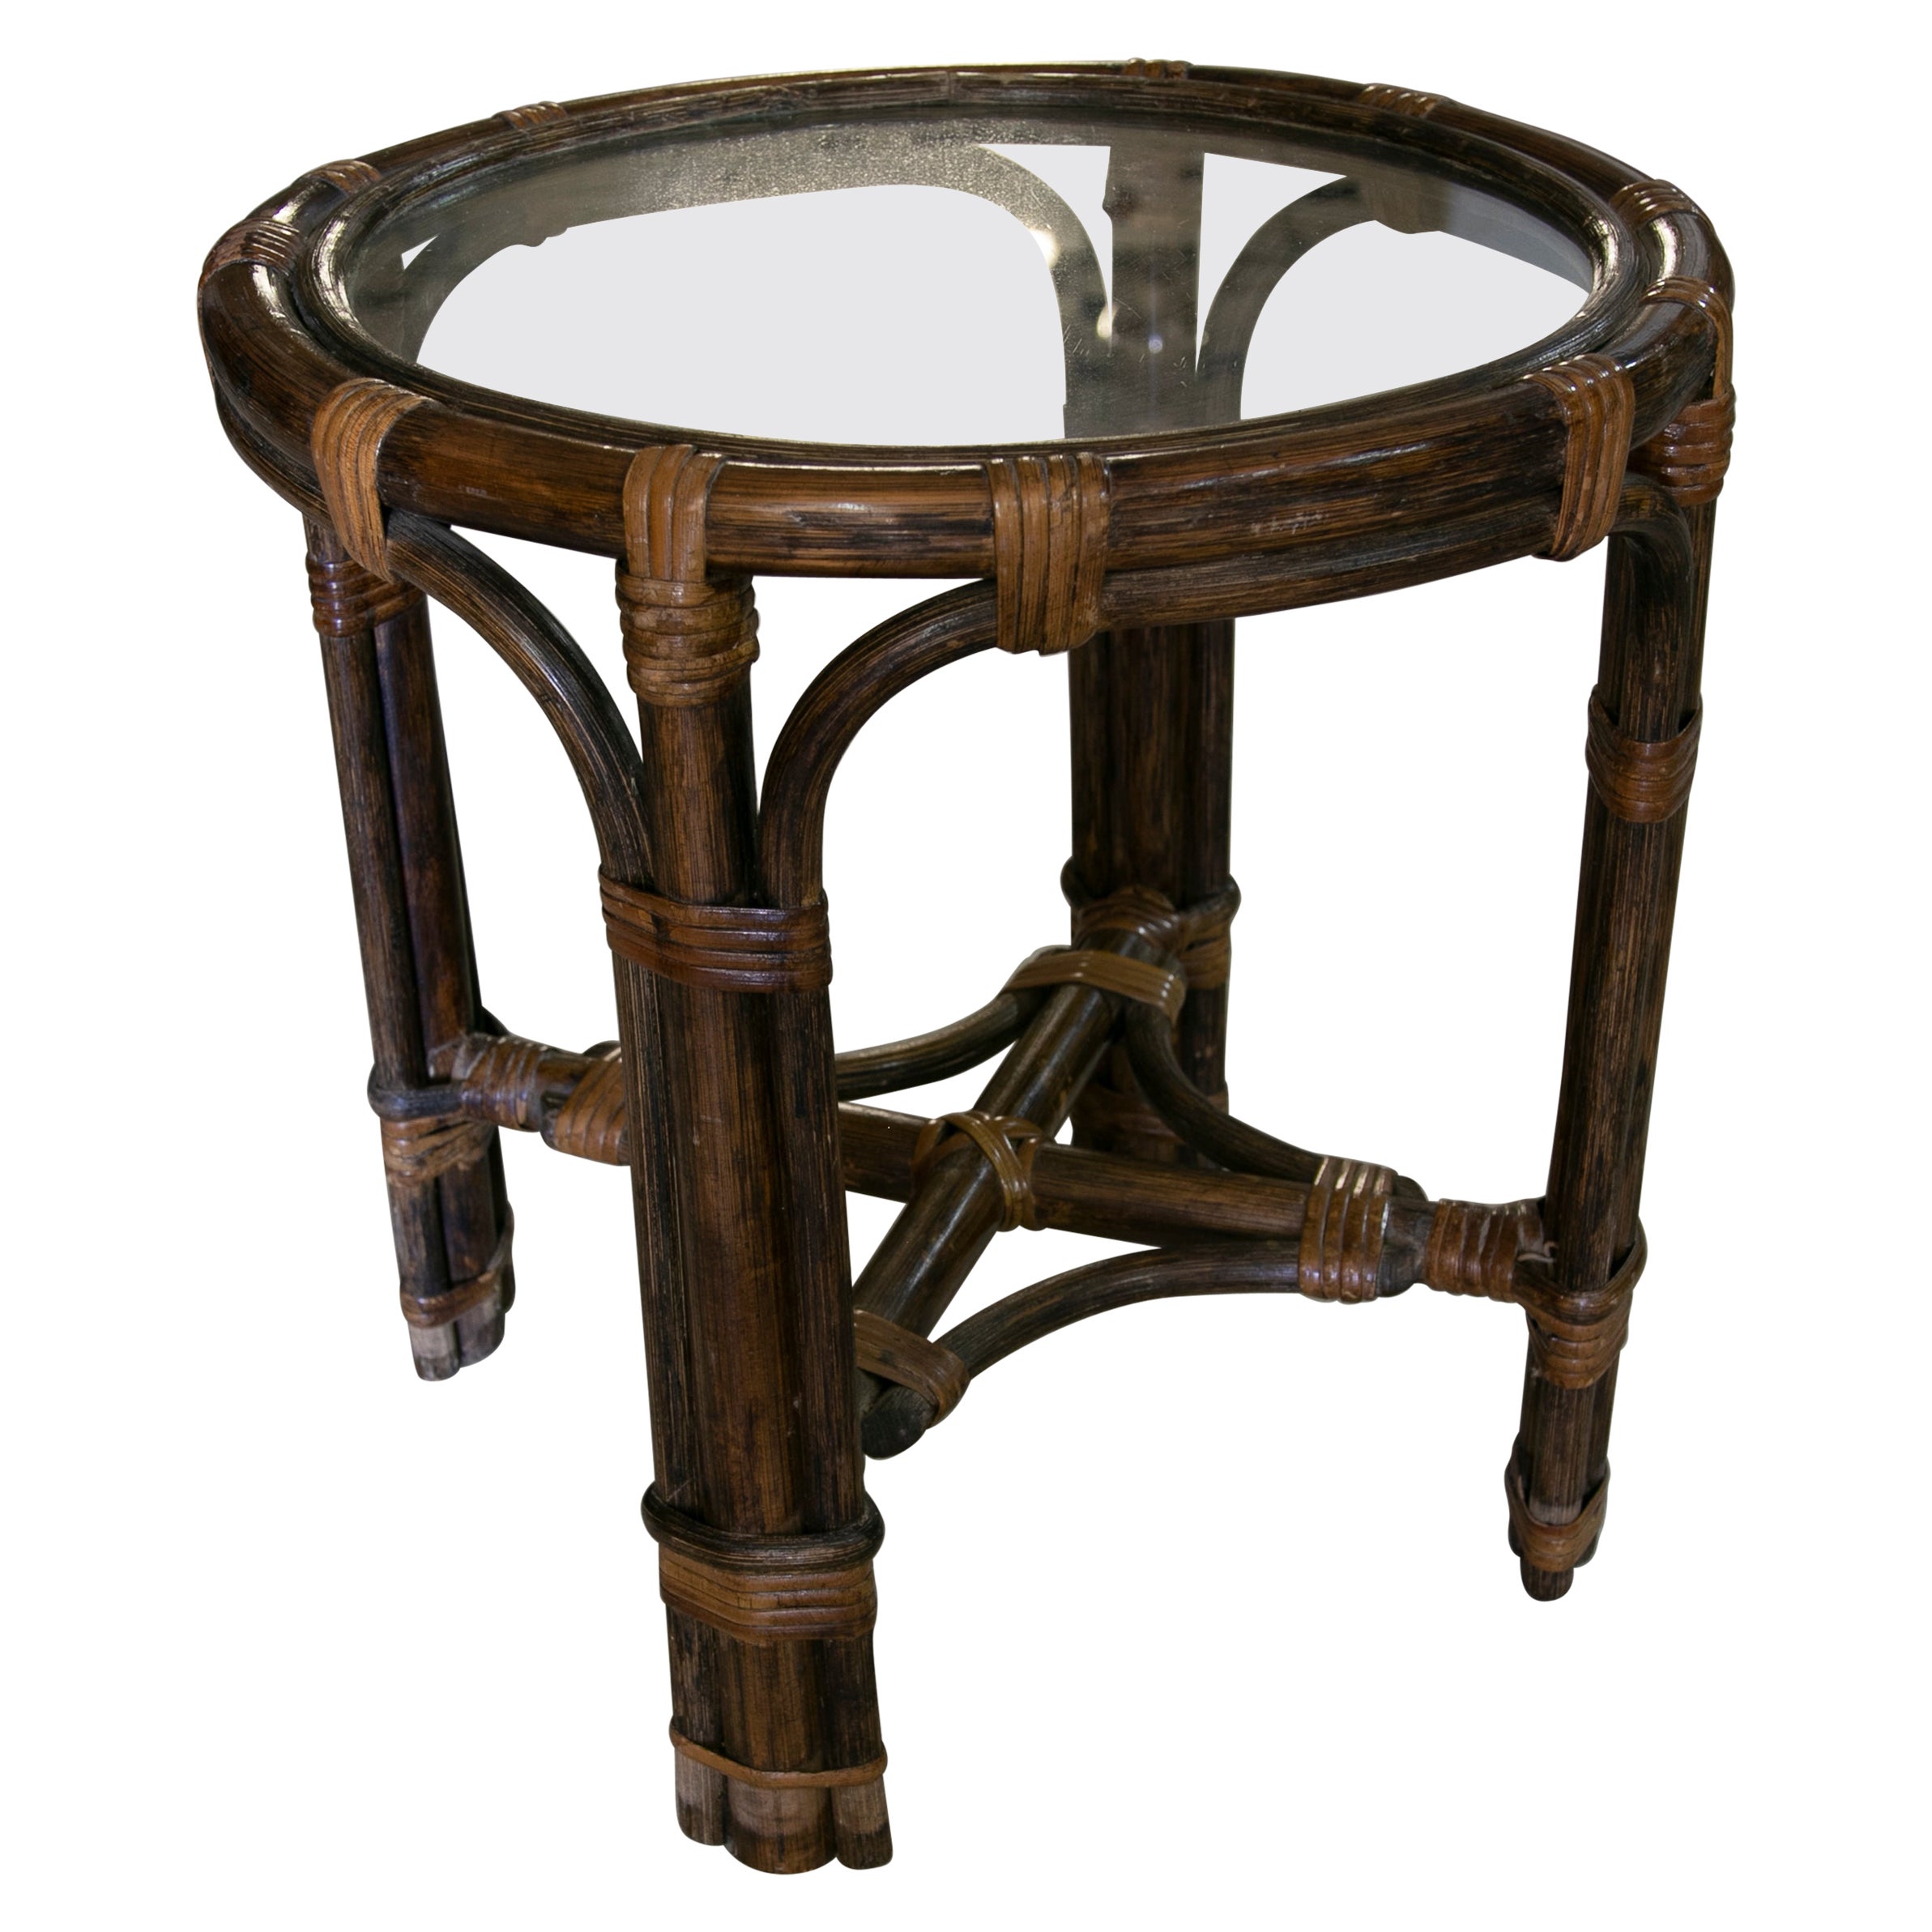 1970s Spanish Handmade Round Bamboo Sidetable For Sale